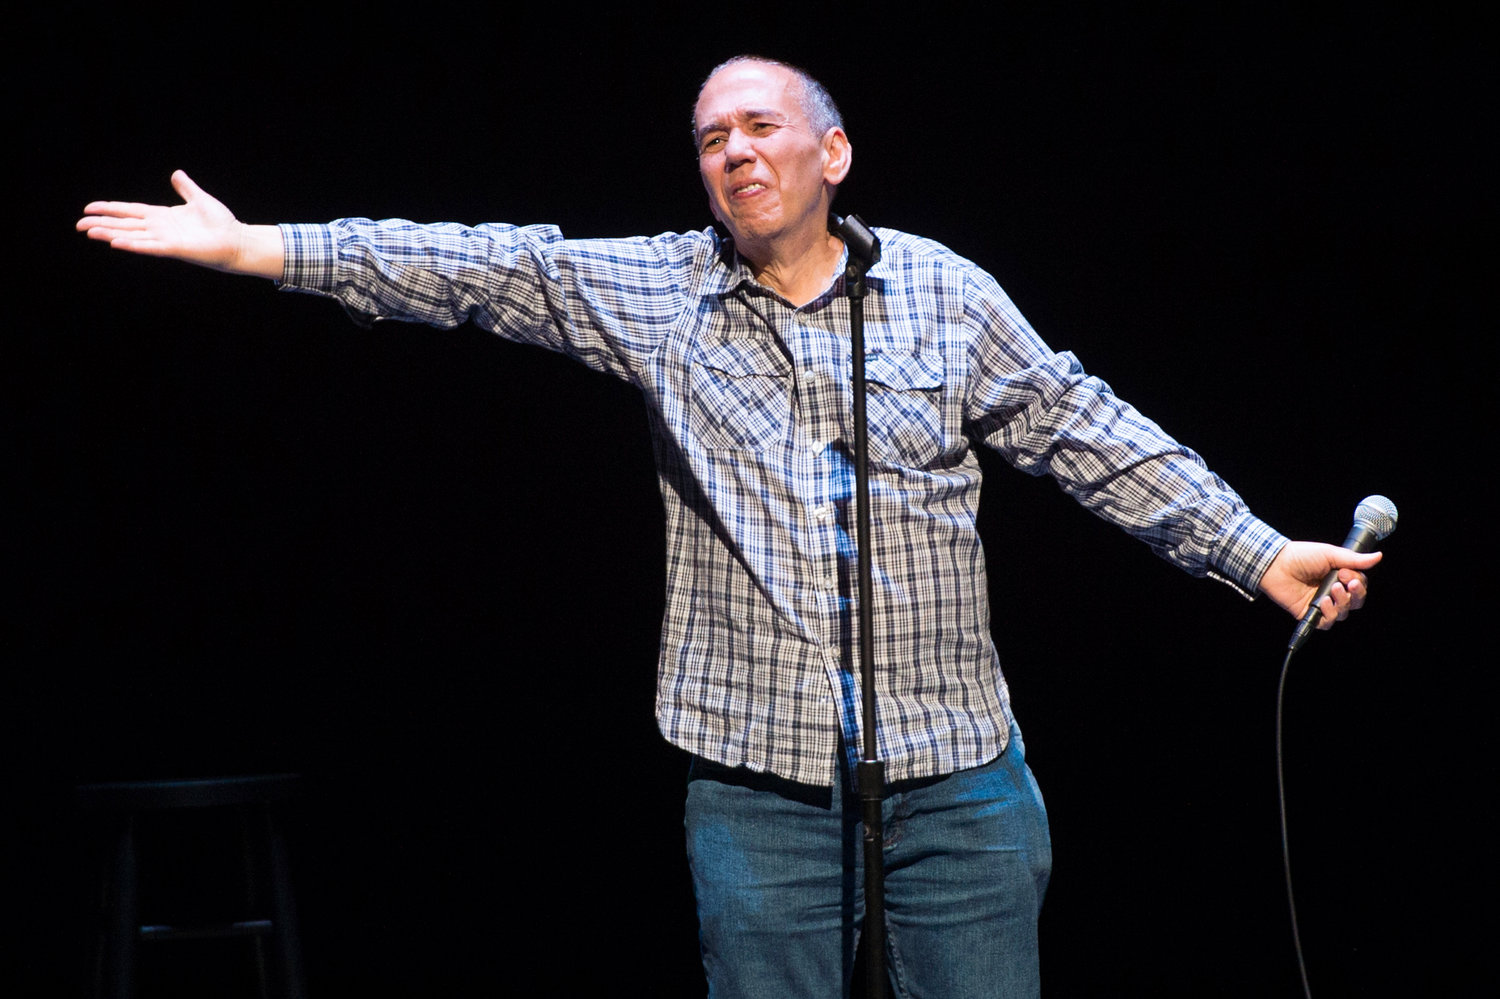 FILE - Comedian Gilbert Gottfried performs at a David Lynch Foundation Benefit for Veterans with PTSD on April 30, 2016, in New York. Gottfried‚Äôs publicist and longtime friend Glenn Schwartz said Gottfried, an actor and legendary standup comic known for his abrasive voice and crude jokes, died Tuesday, April 12, 2022. He was 67. (Photo by Scott Roth/Invision/AP, File)